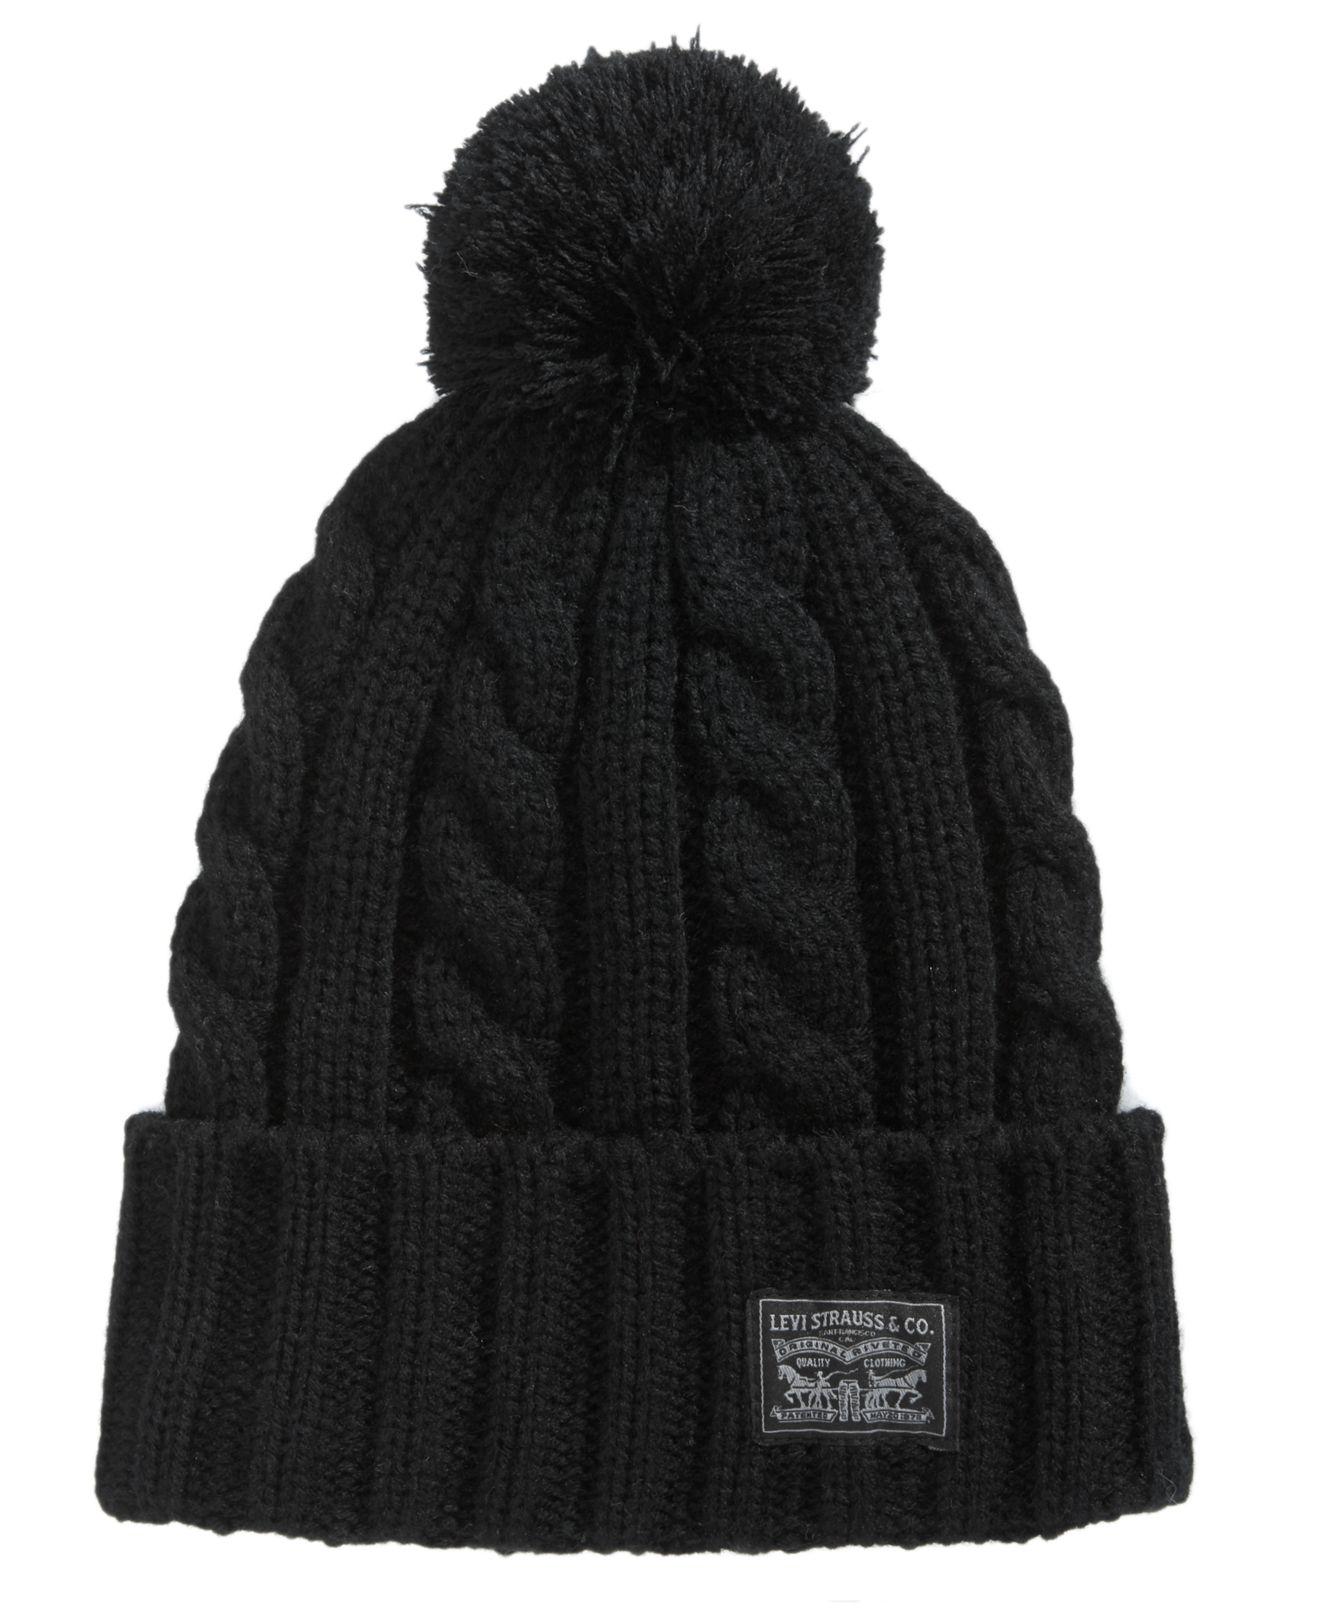 Levi's Synthetic Men's Pom Pom Cable-knit Beanie in Black for Men - Lyst